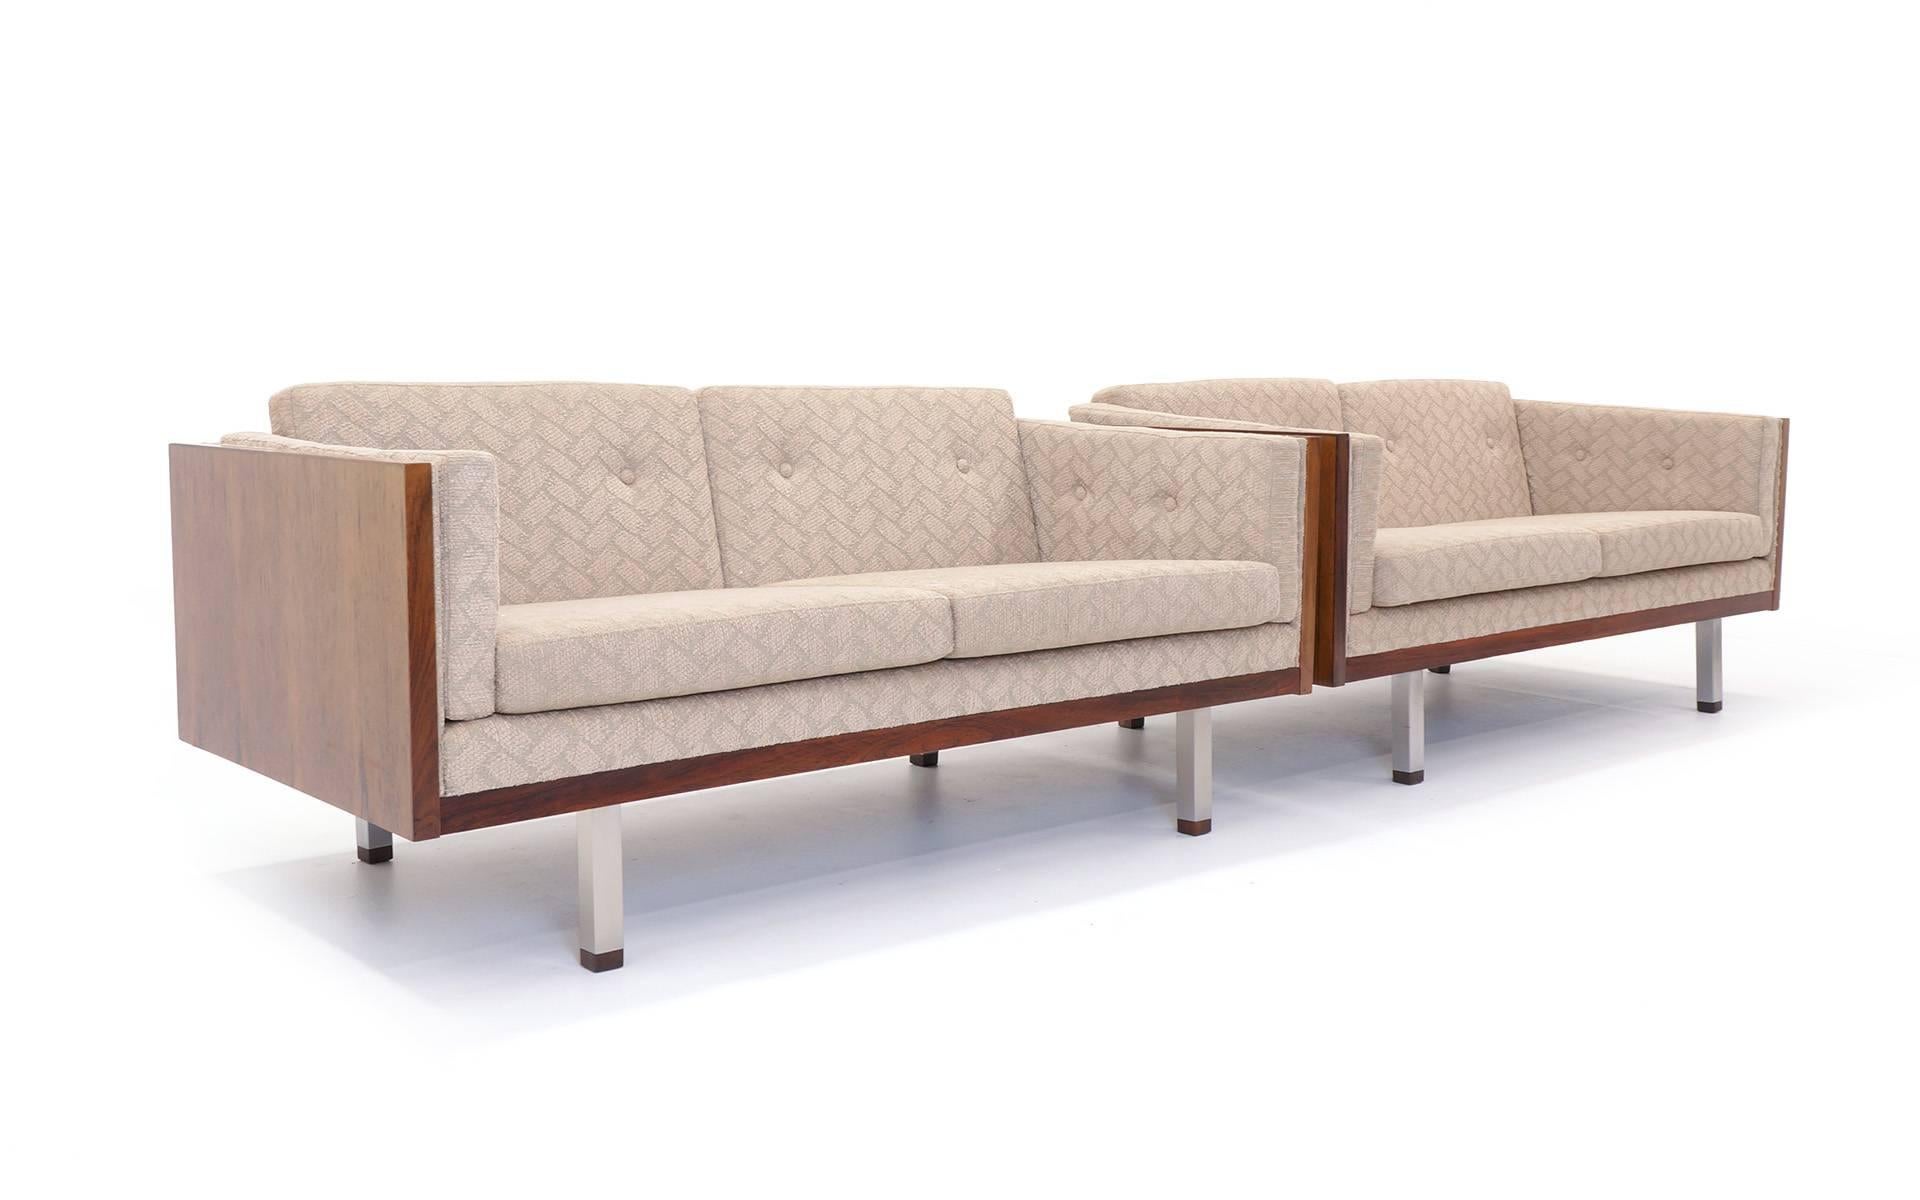 Matching pair of rosewood loveseats designed by Jydsk Møbelværk. Brushed steel legs with rosewood feet. Also see our listing for the matching chair.